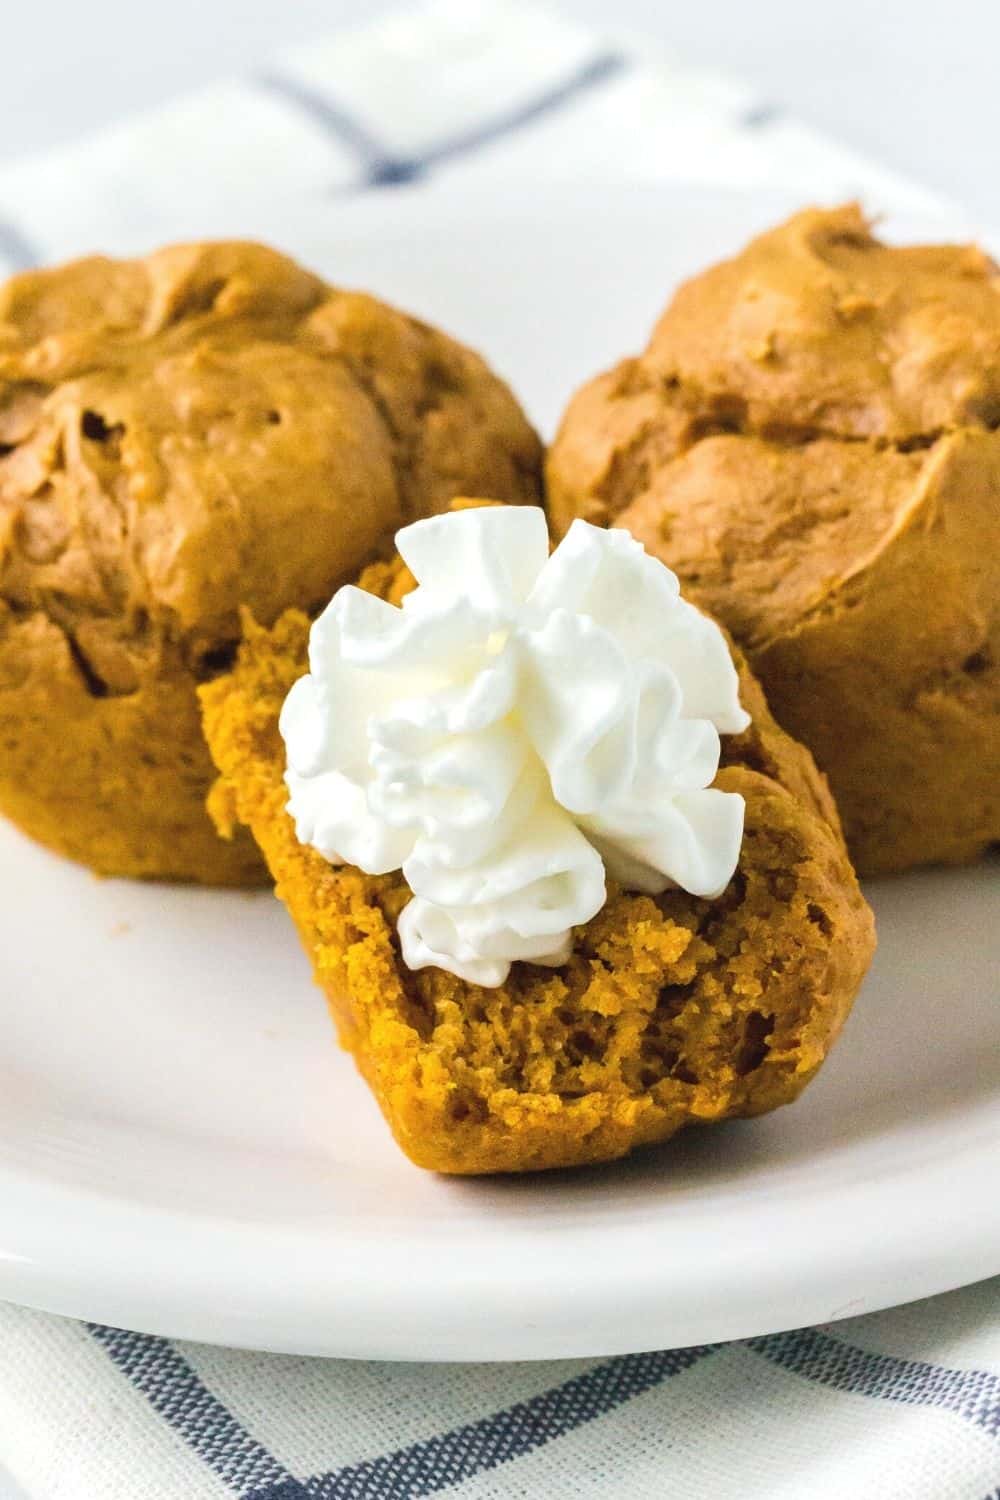 a half of a cake mix pumpkin muffin, topped with whipped cream, on a plate with two other whole muffins